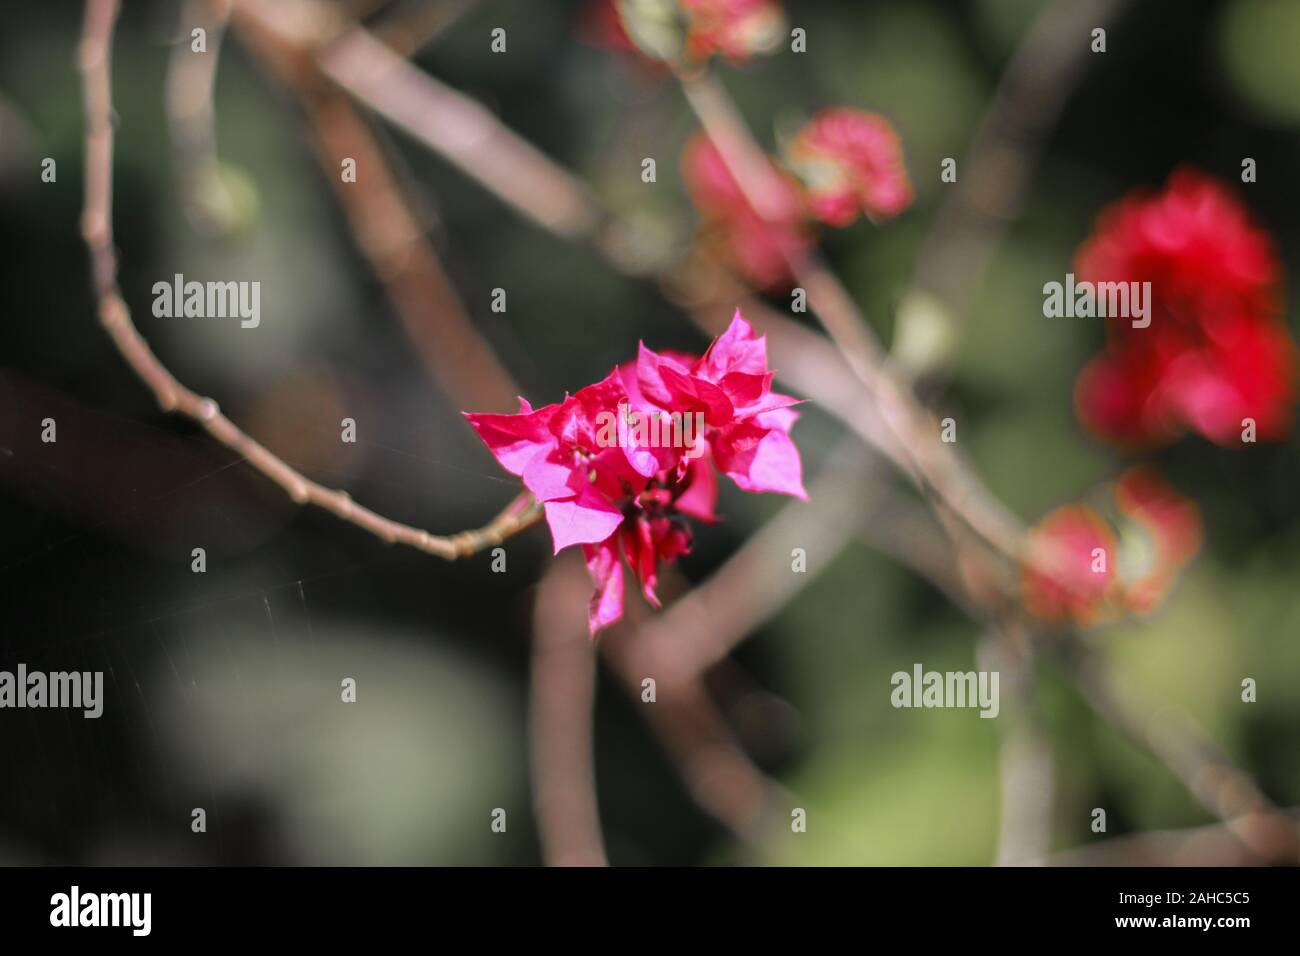 Phlox family flower picture in Bangladesh Stock Photo